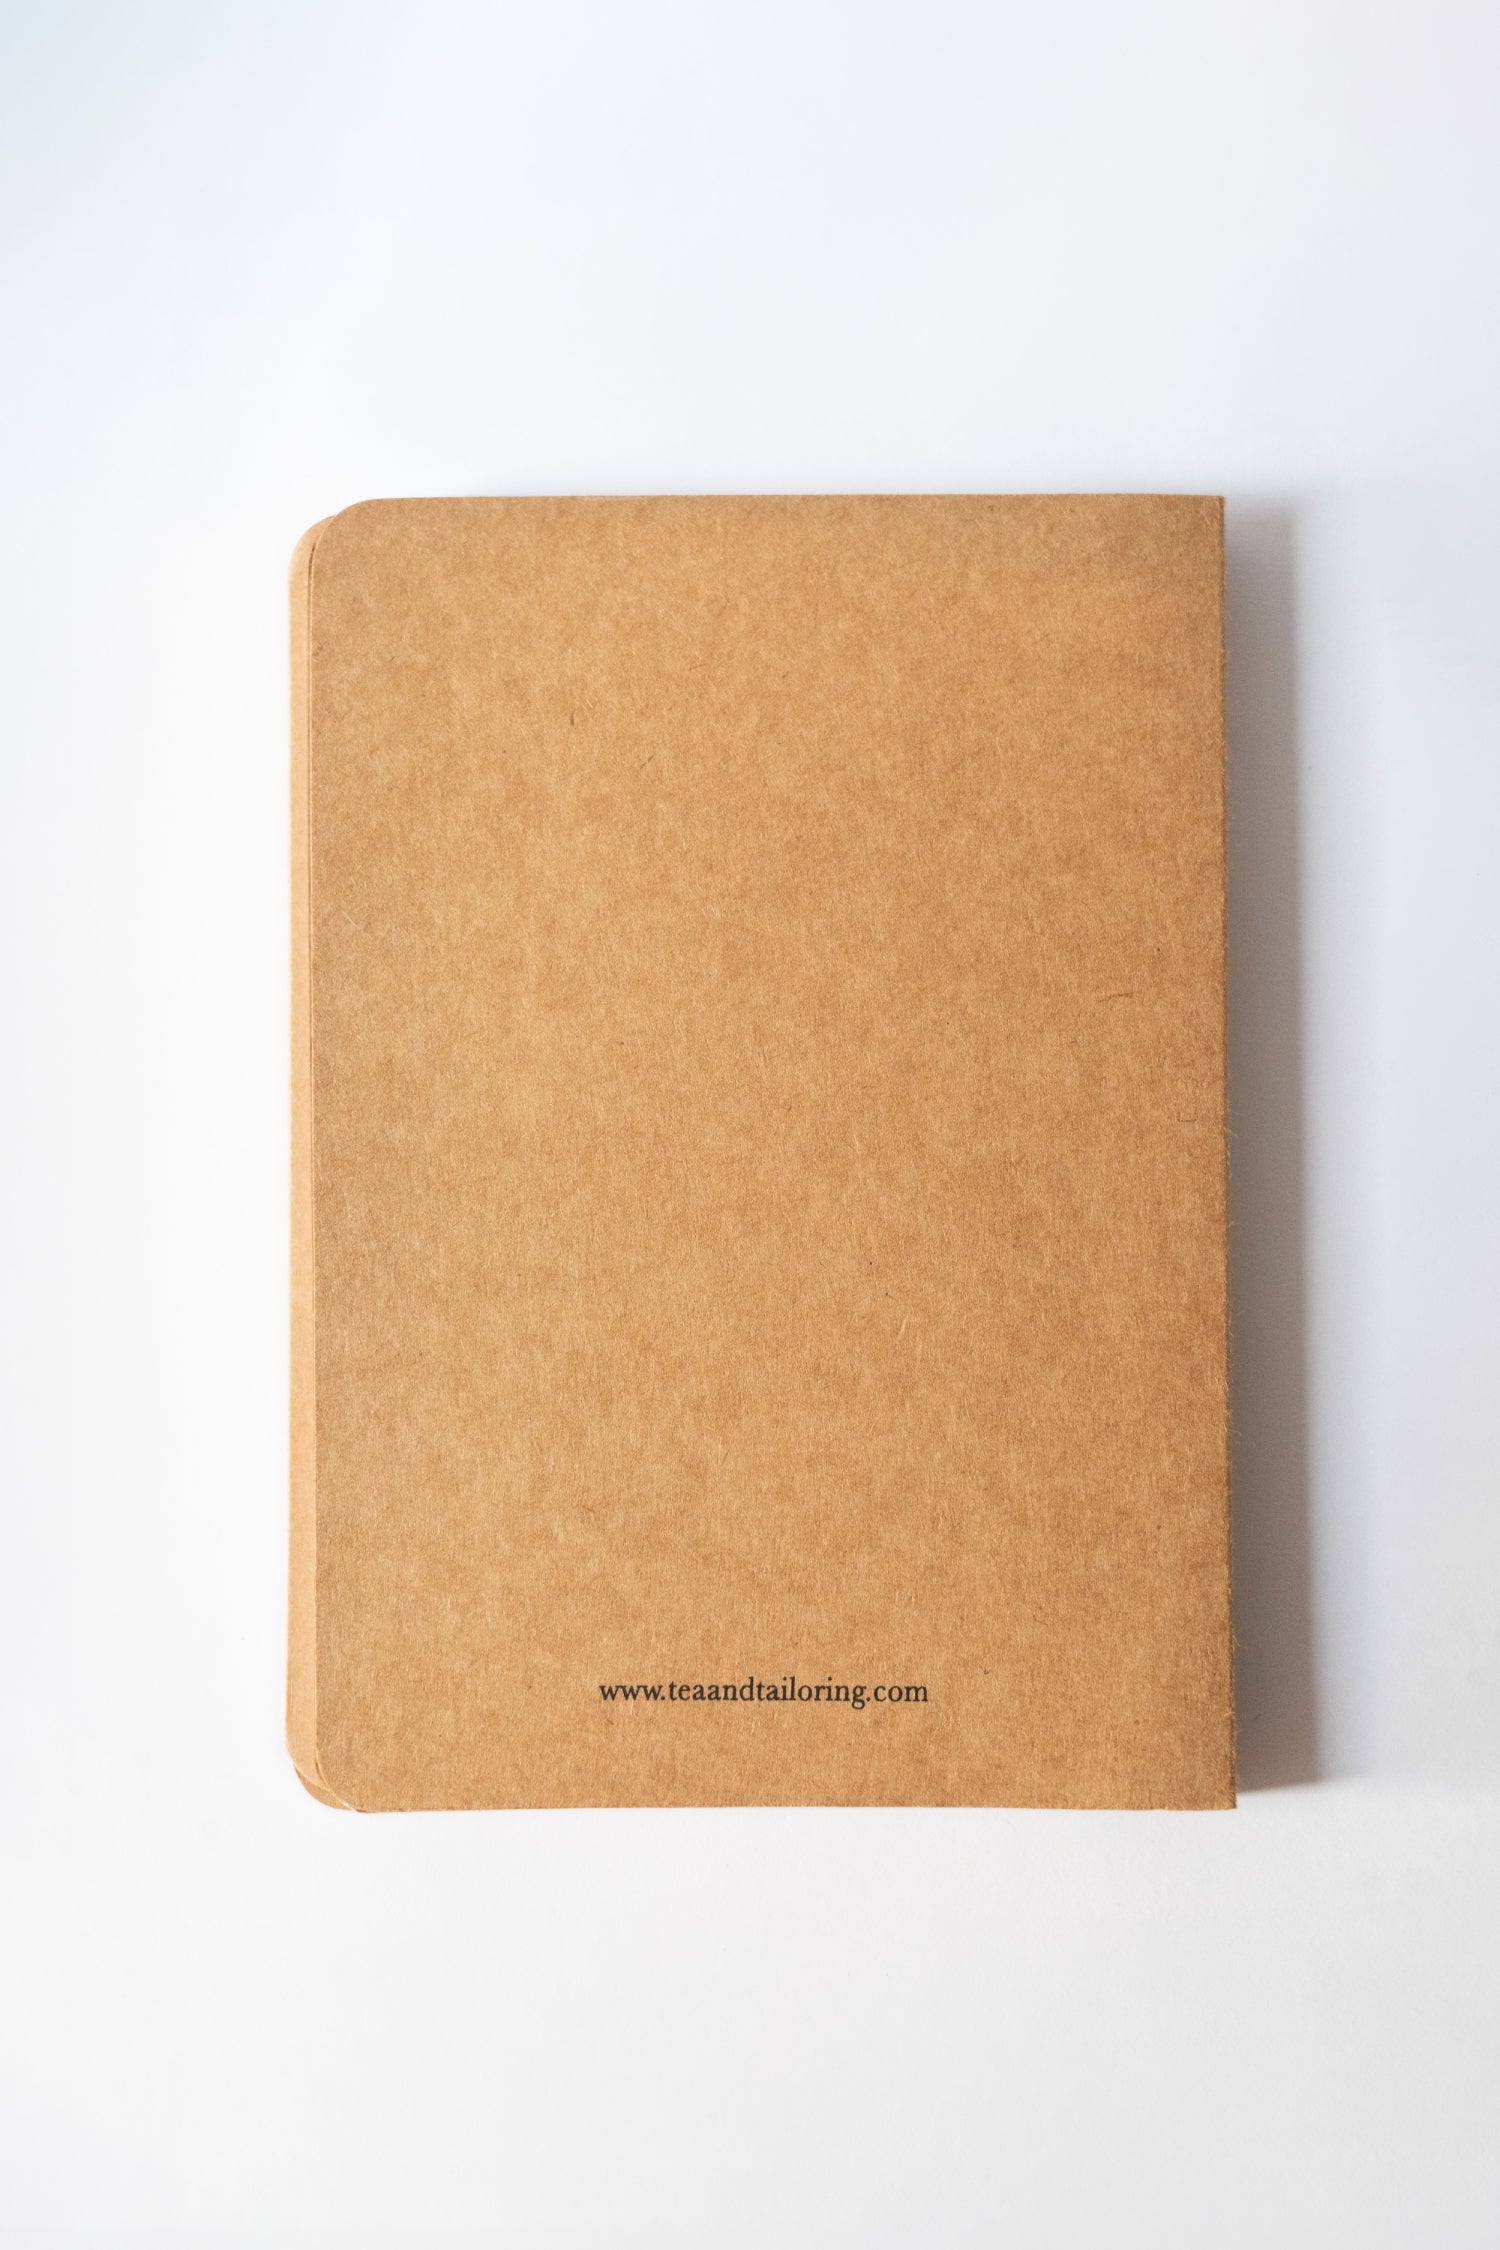 Mr. Brown Dotted Pattern Diary - Brown Journal Notebook